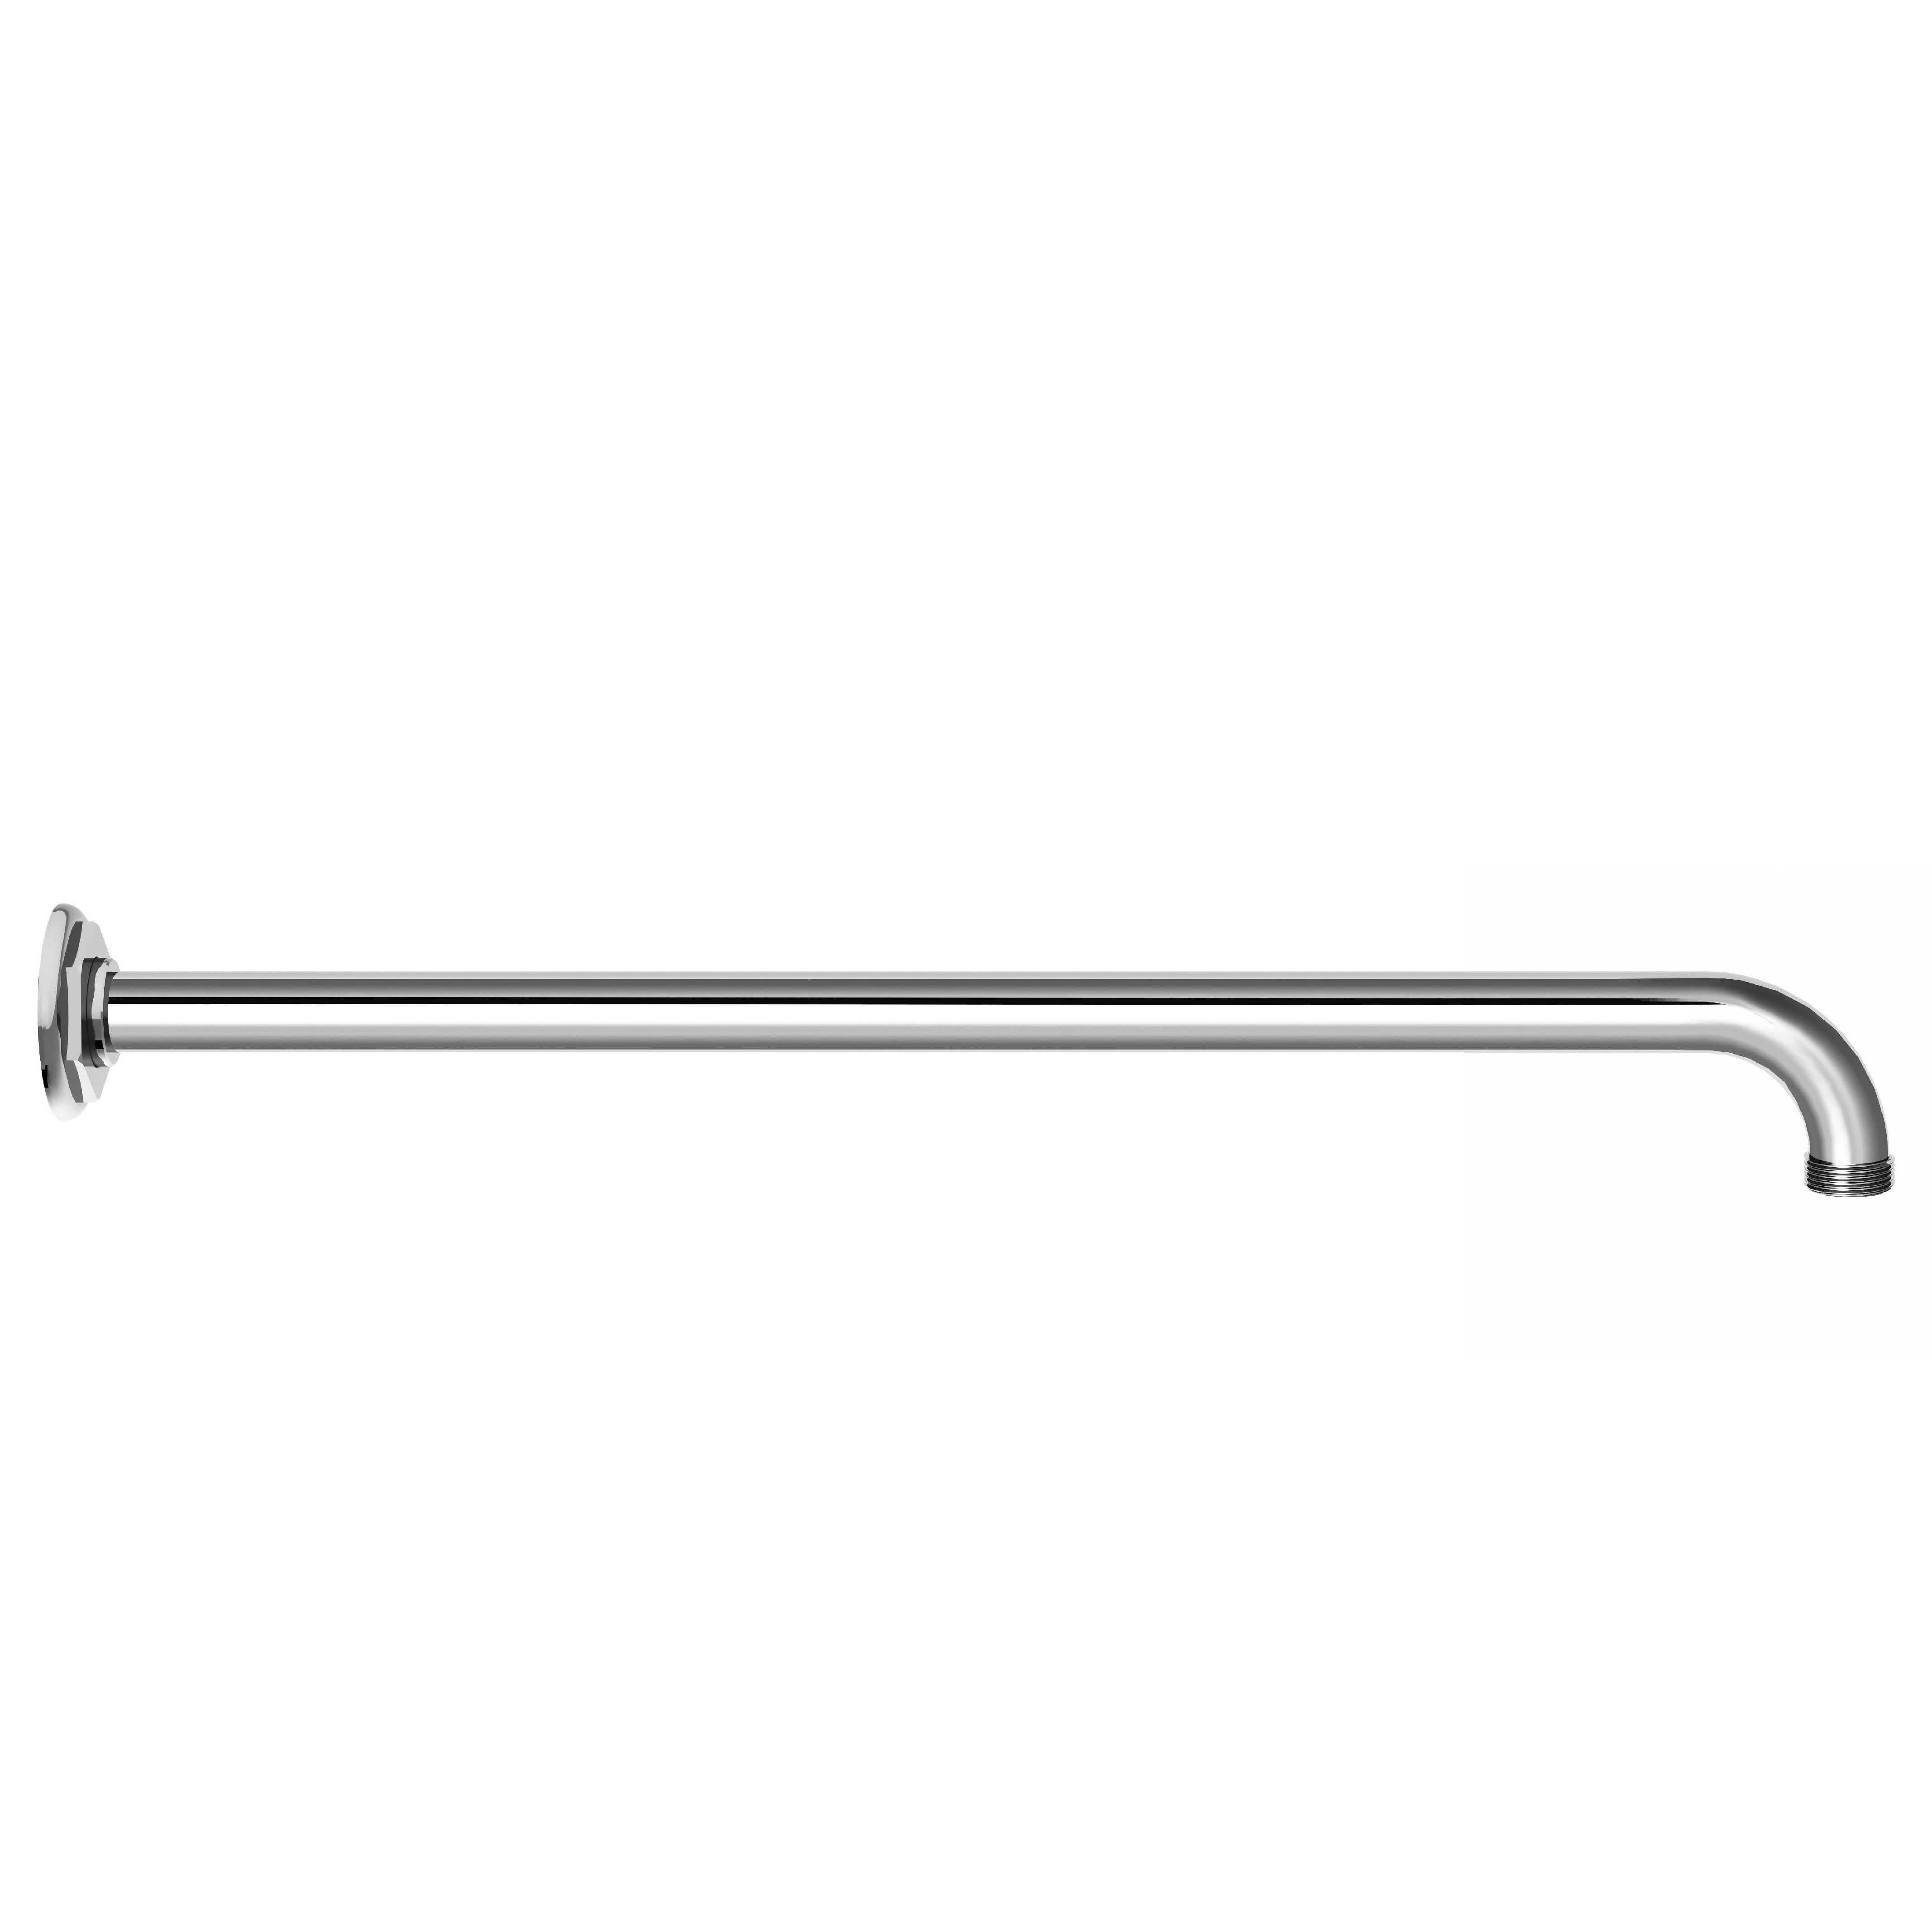 M81-2W450 Wall mounted shower arm 450mm